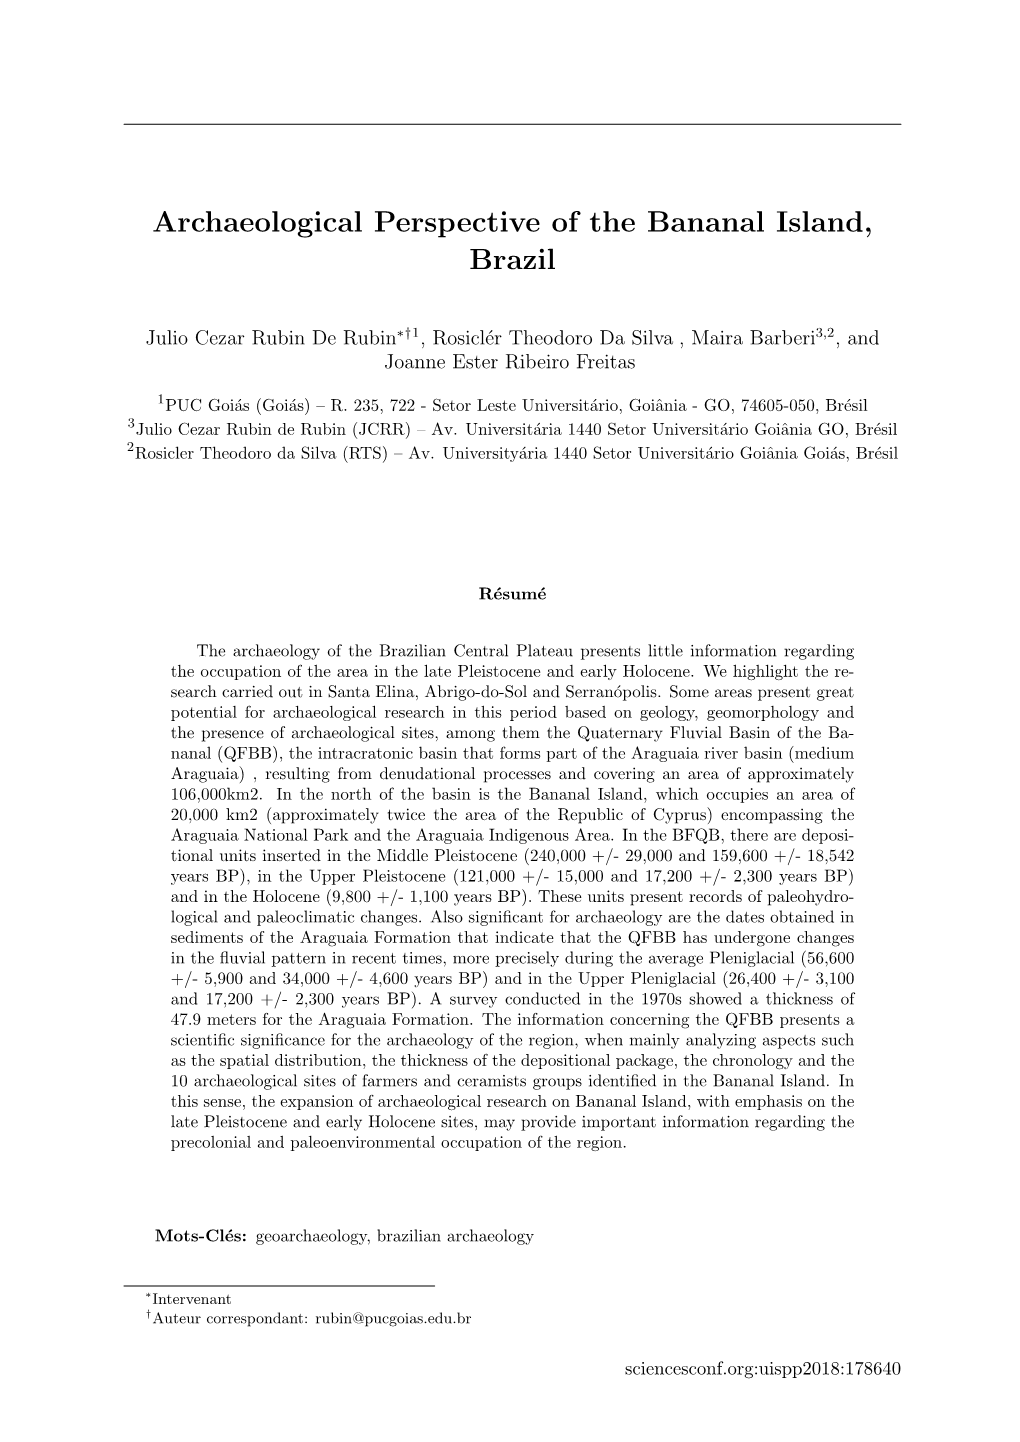 Archaeological Perspective of the Bananal Island, Brazil